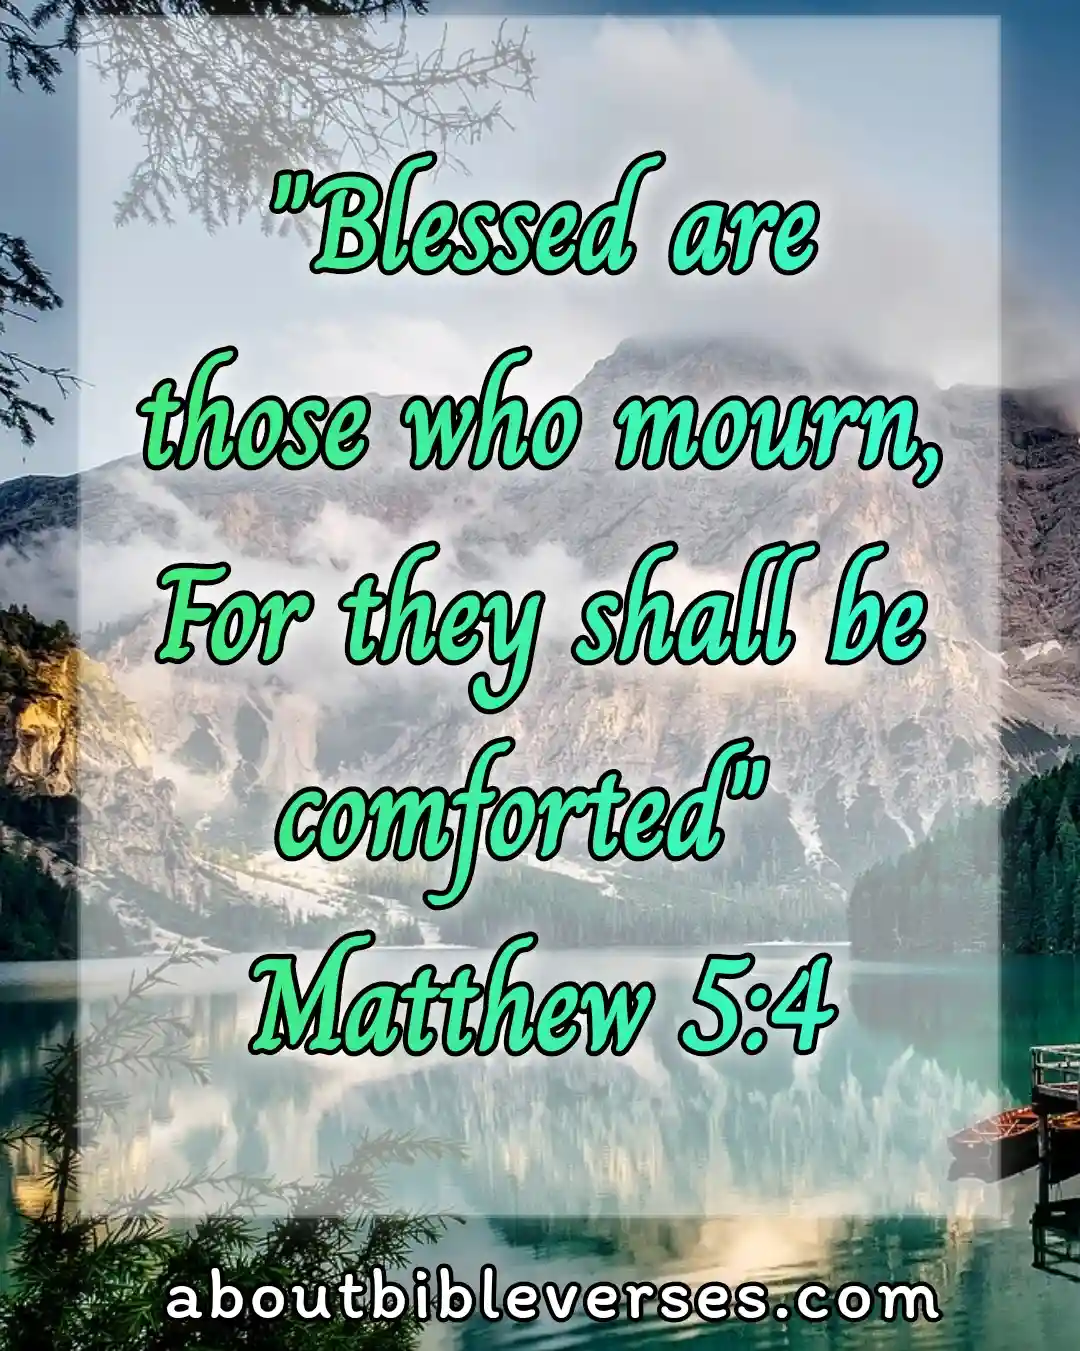 Bible Verses On Gods Comfort And Compassion (Matthew 5:4)